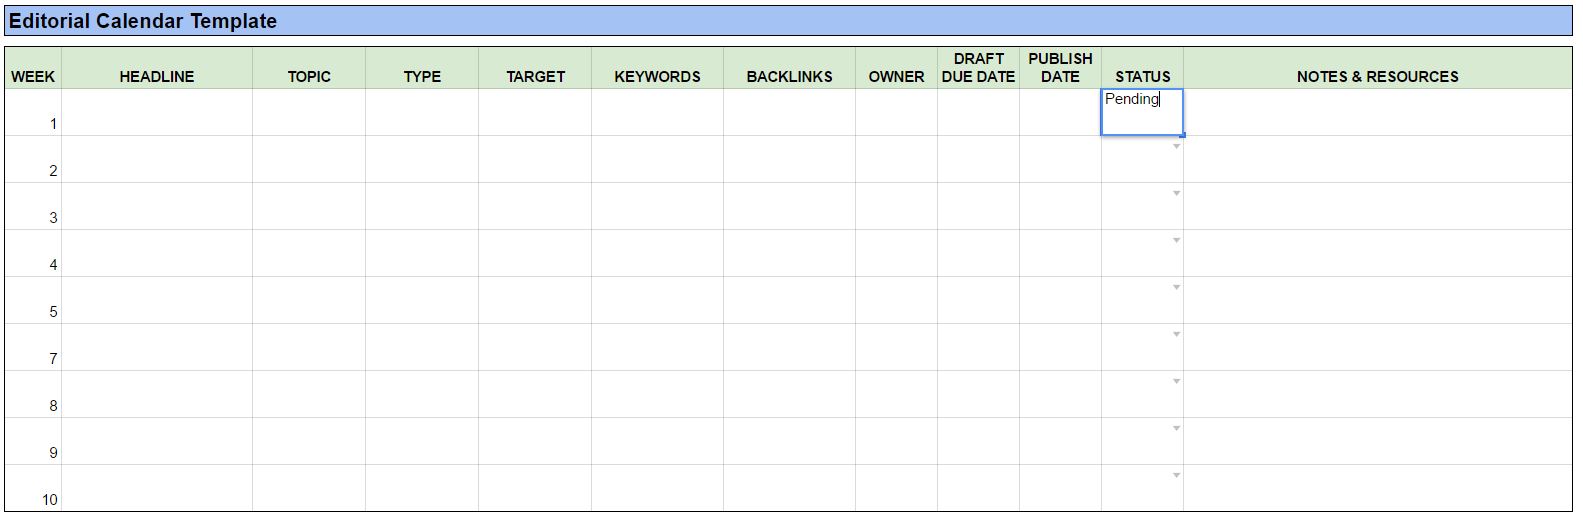 Template of Editorial Calendar used at Bourbon Creative; created with Google Spreadsheets;